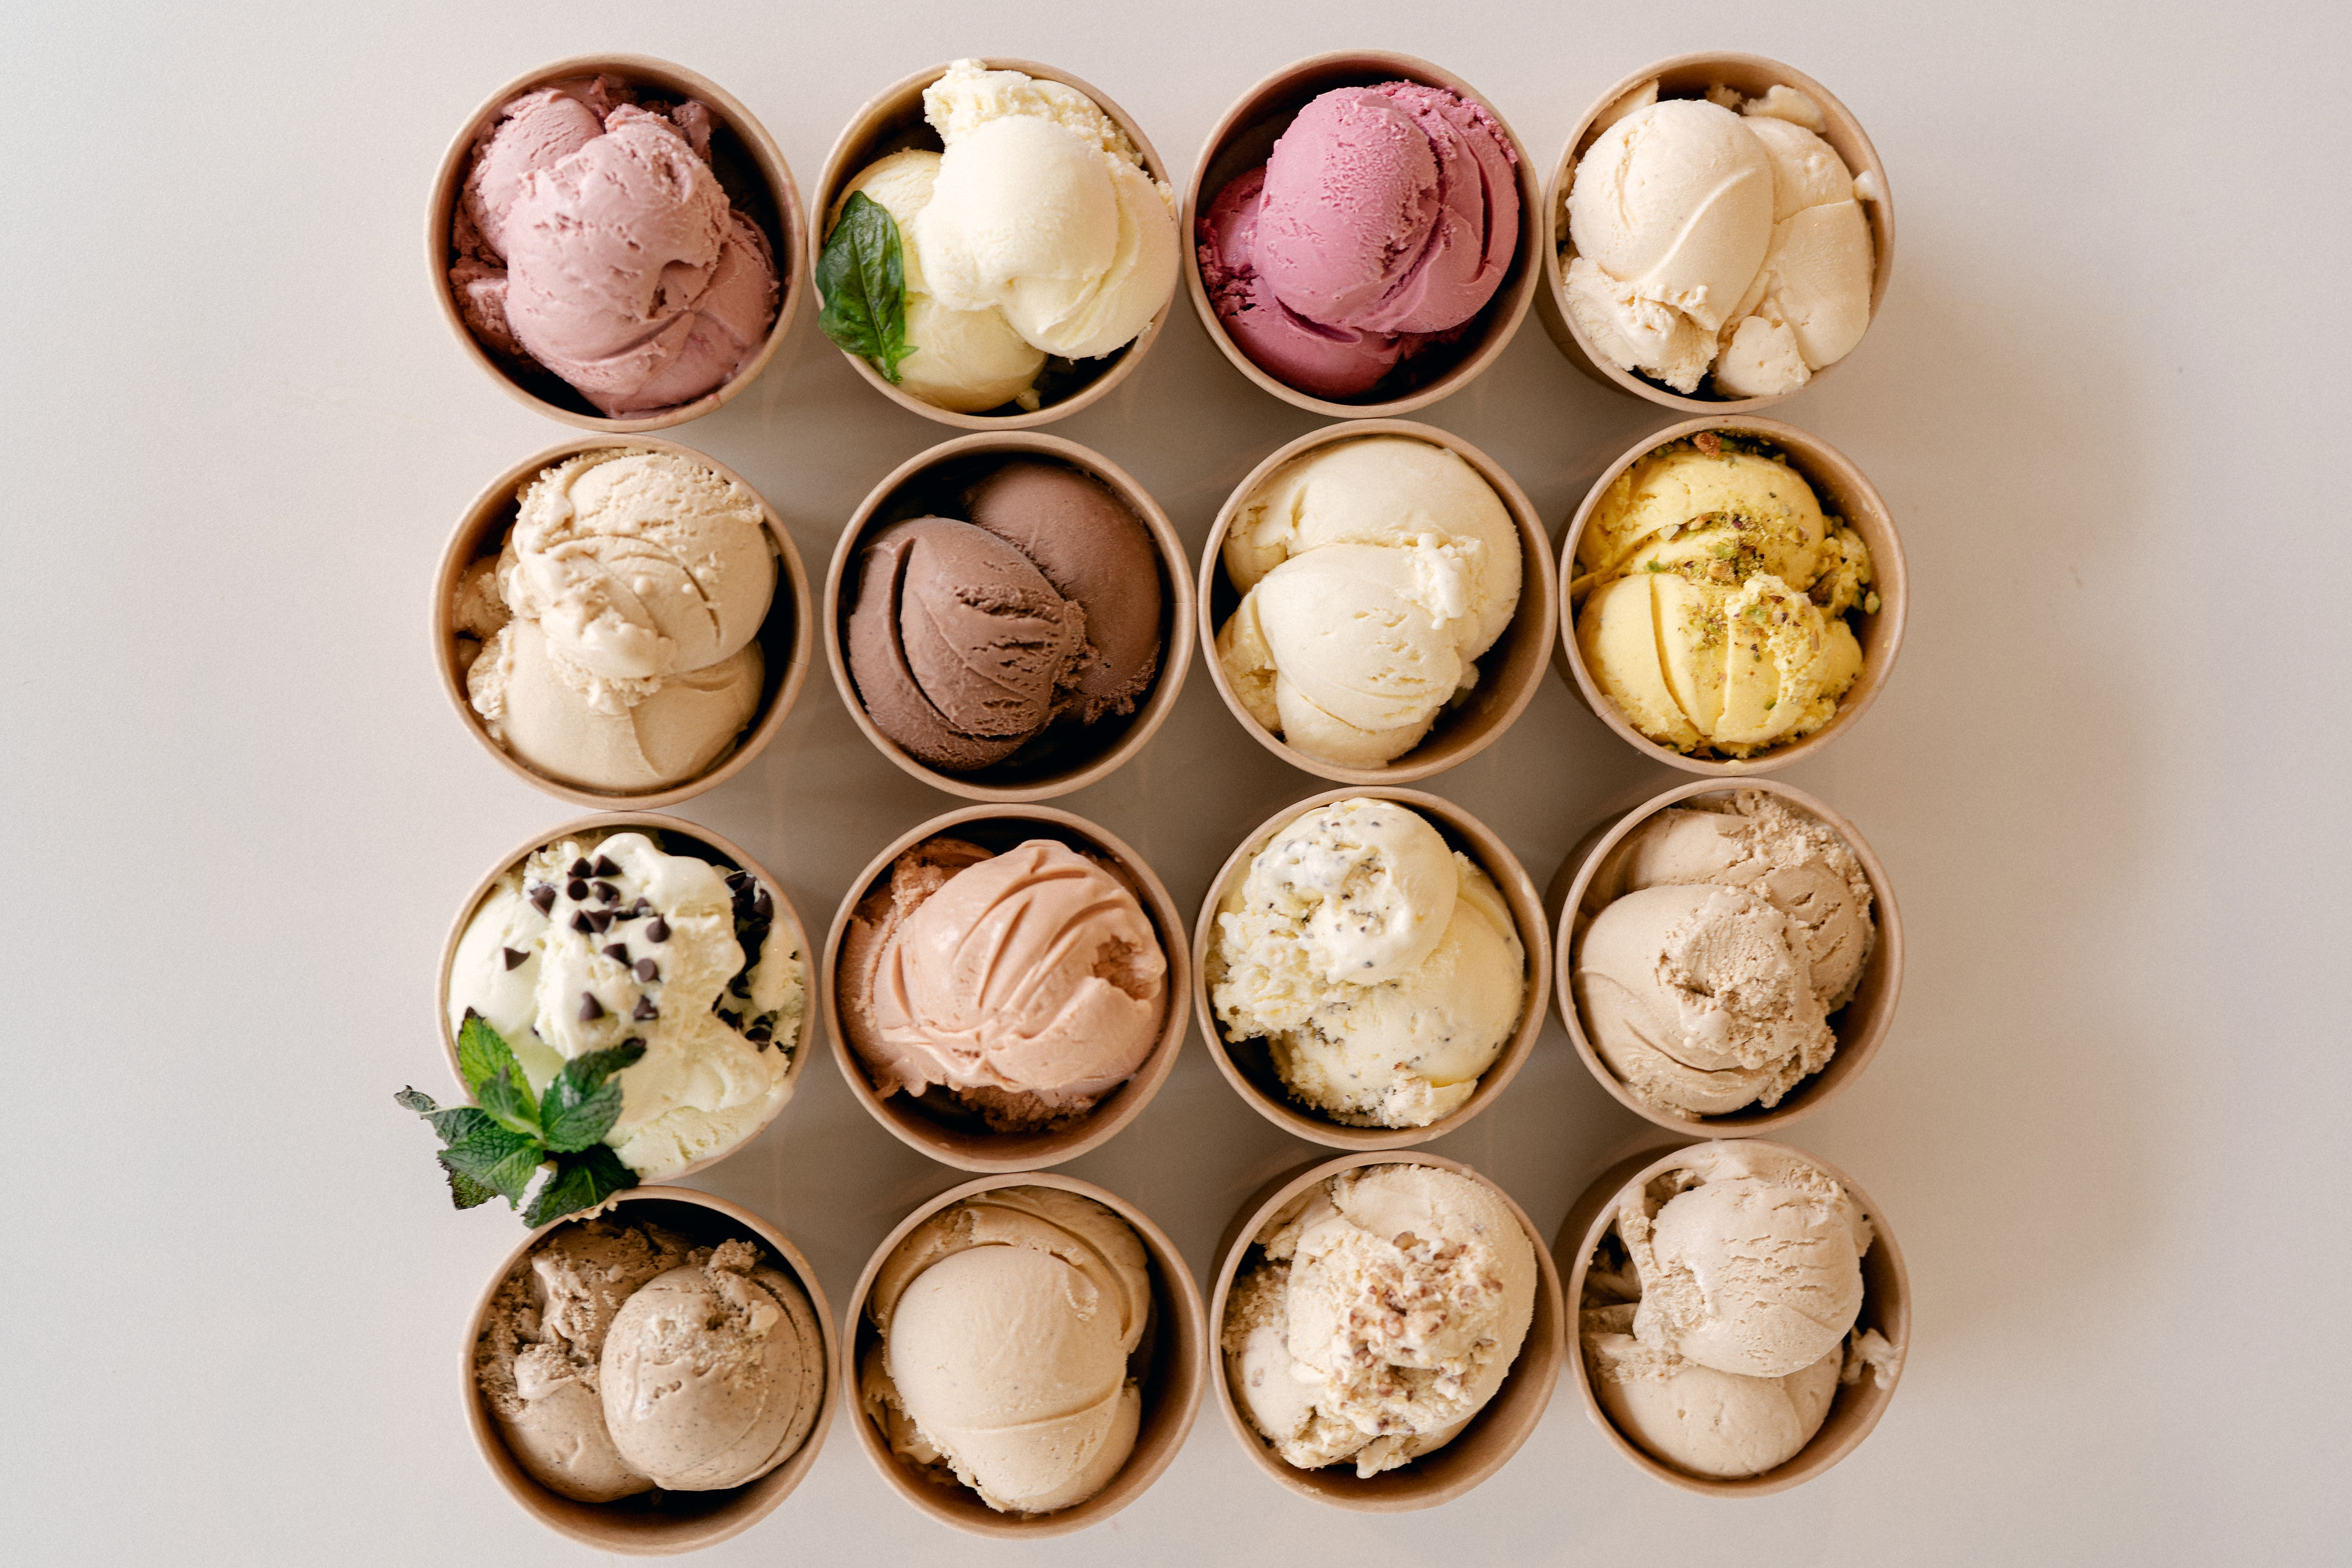 Sixteen scoops of Craft Creamery ice cream in small cardboard cups.